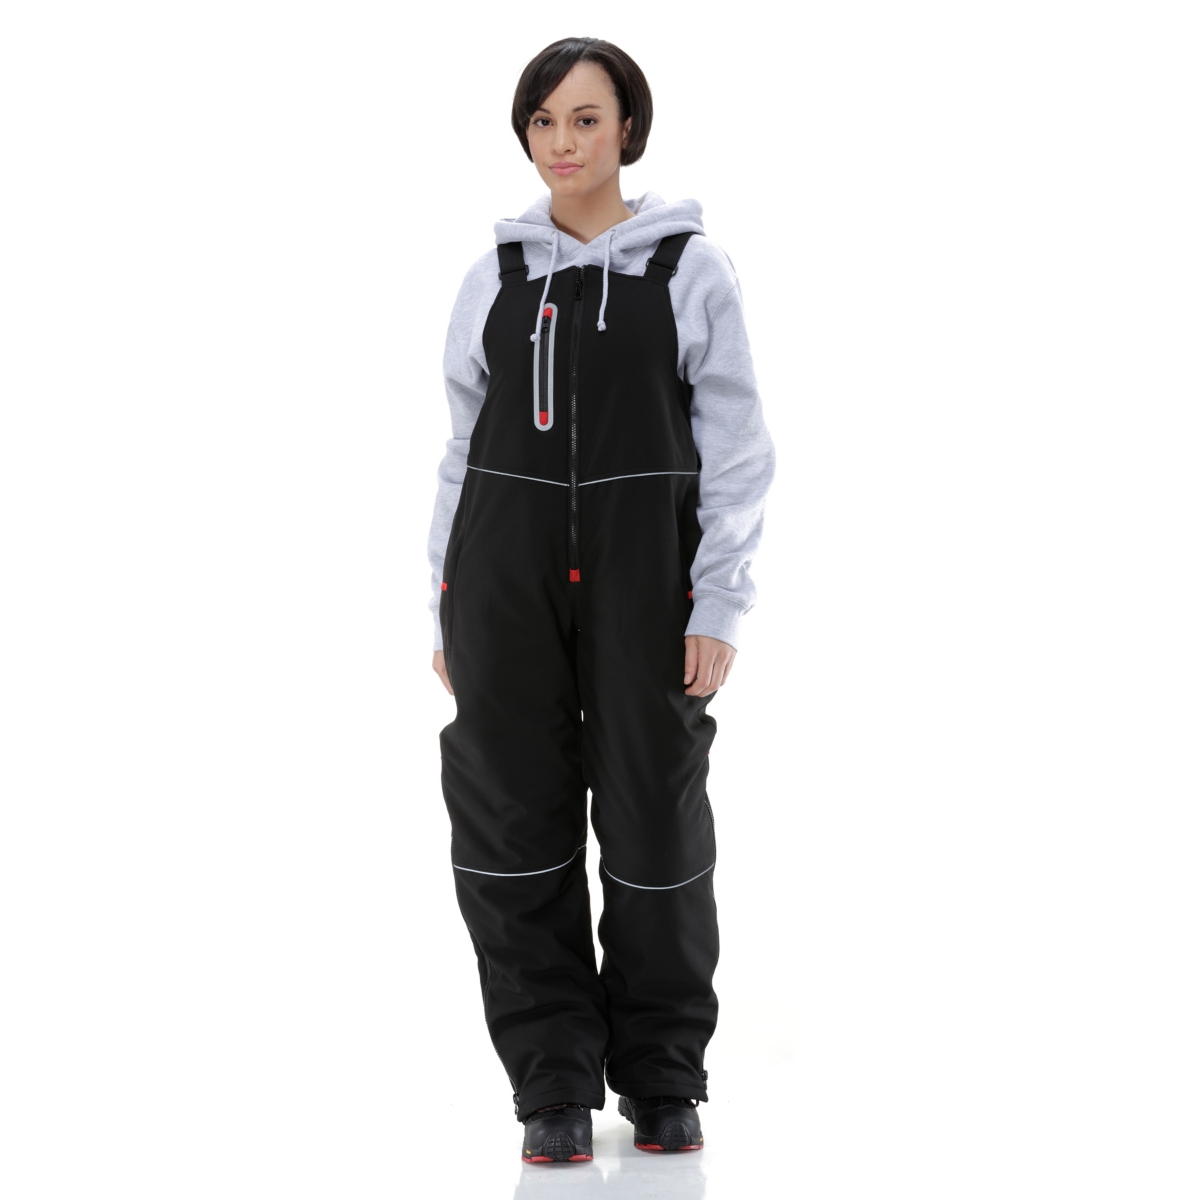 Women's Insulated Softshell Bib Overalls with Reflective Piping - Black